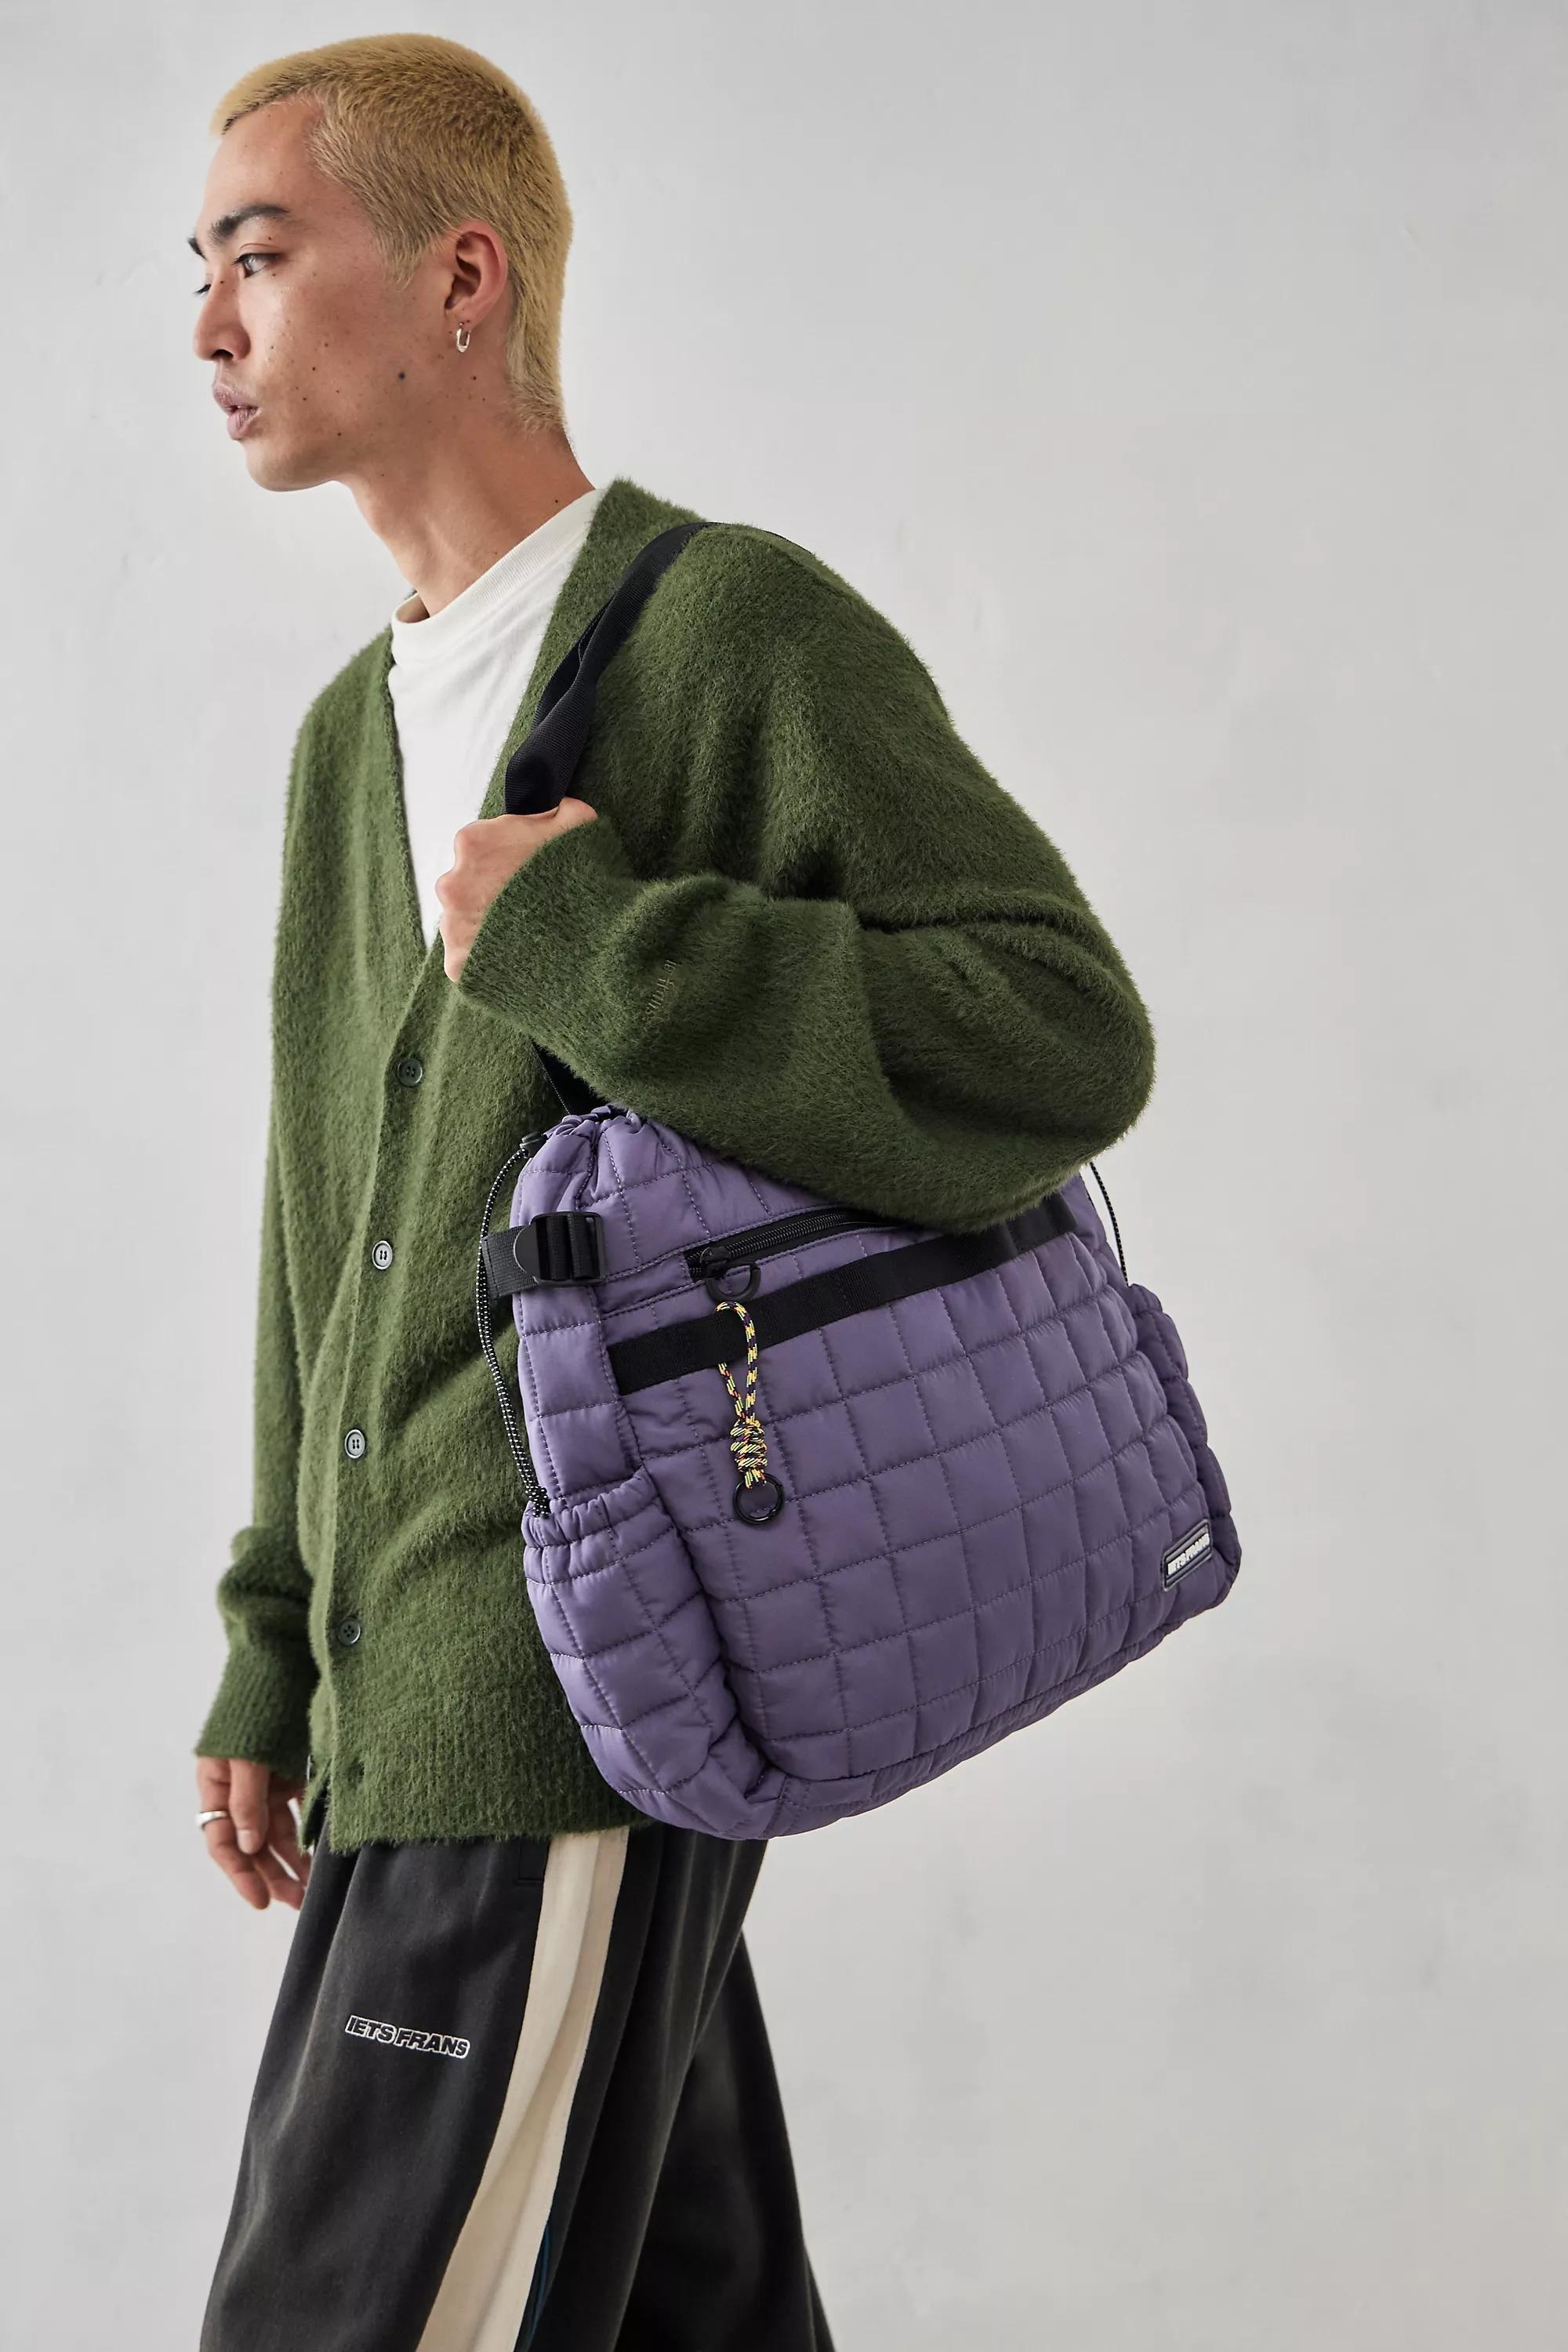 Urban Outfitters - Purple Puffer Tote Bag